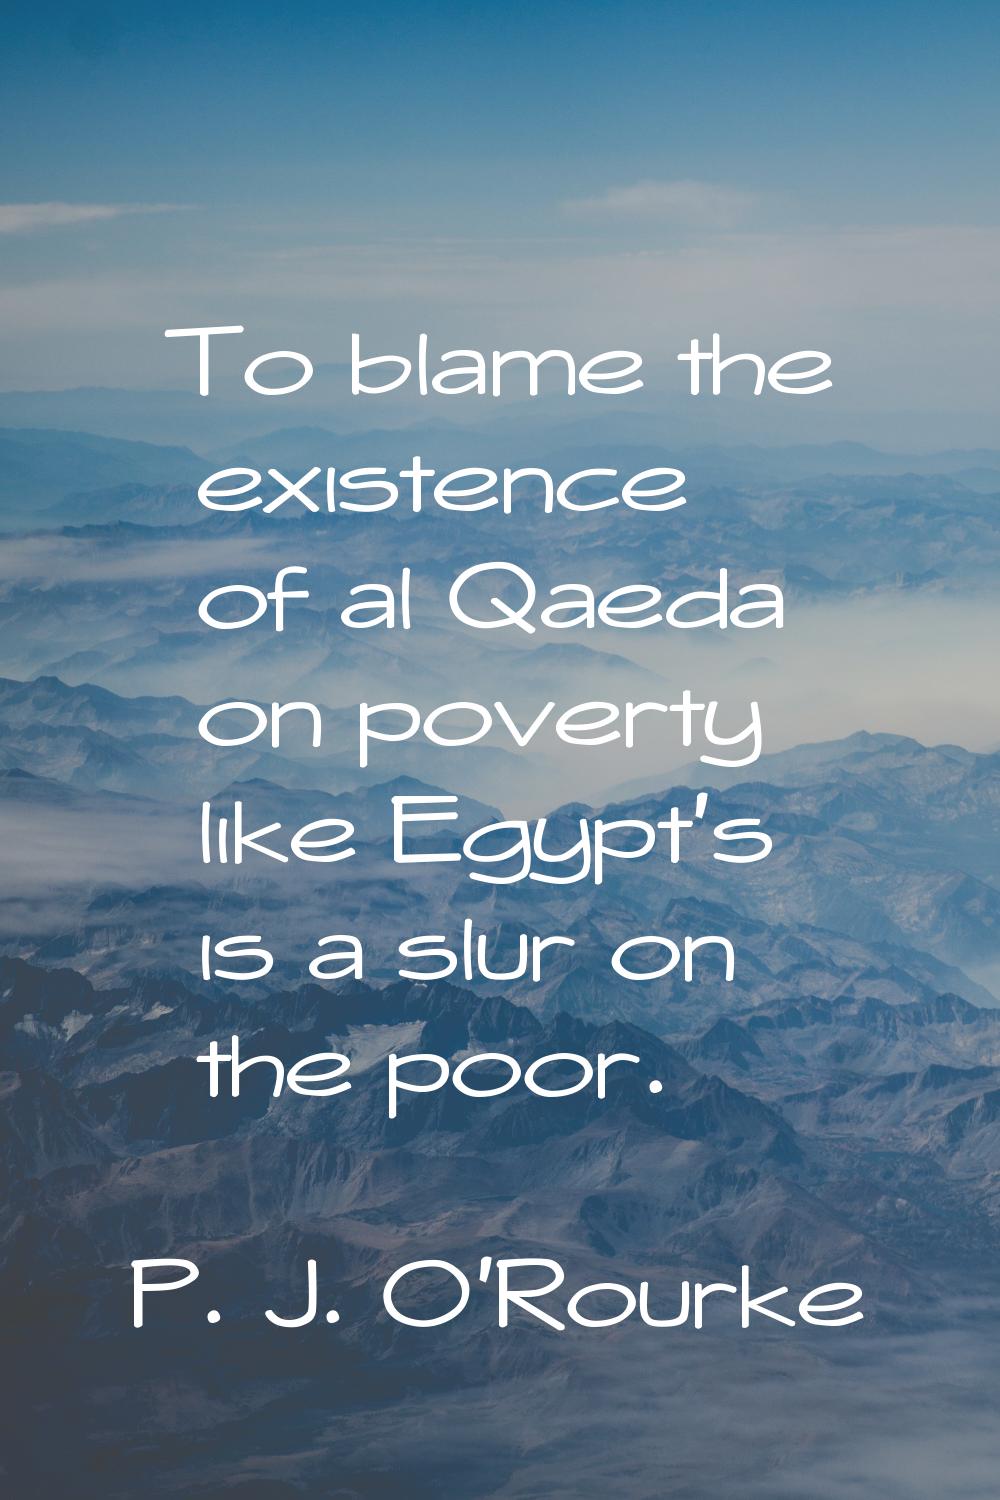 To blame the existence of al Qaeda on poverty like Egypt's is a slur on the poor.